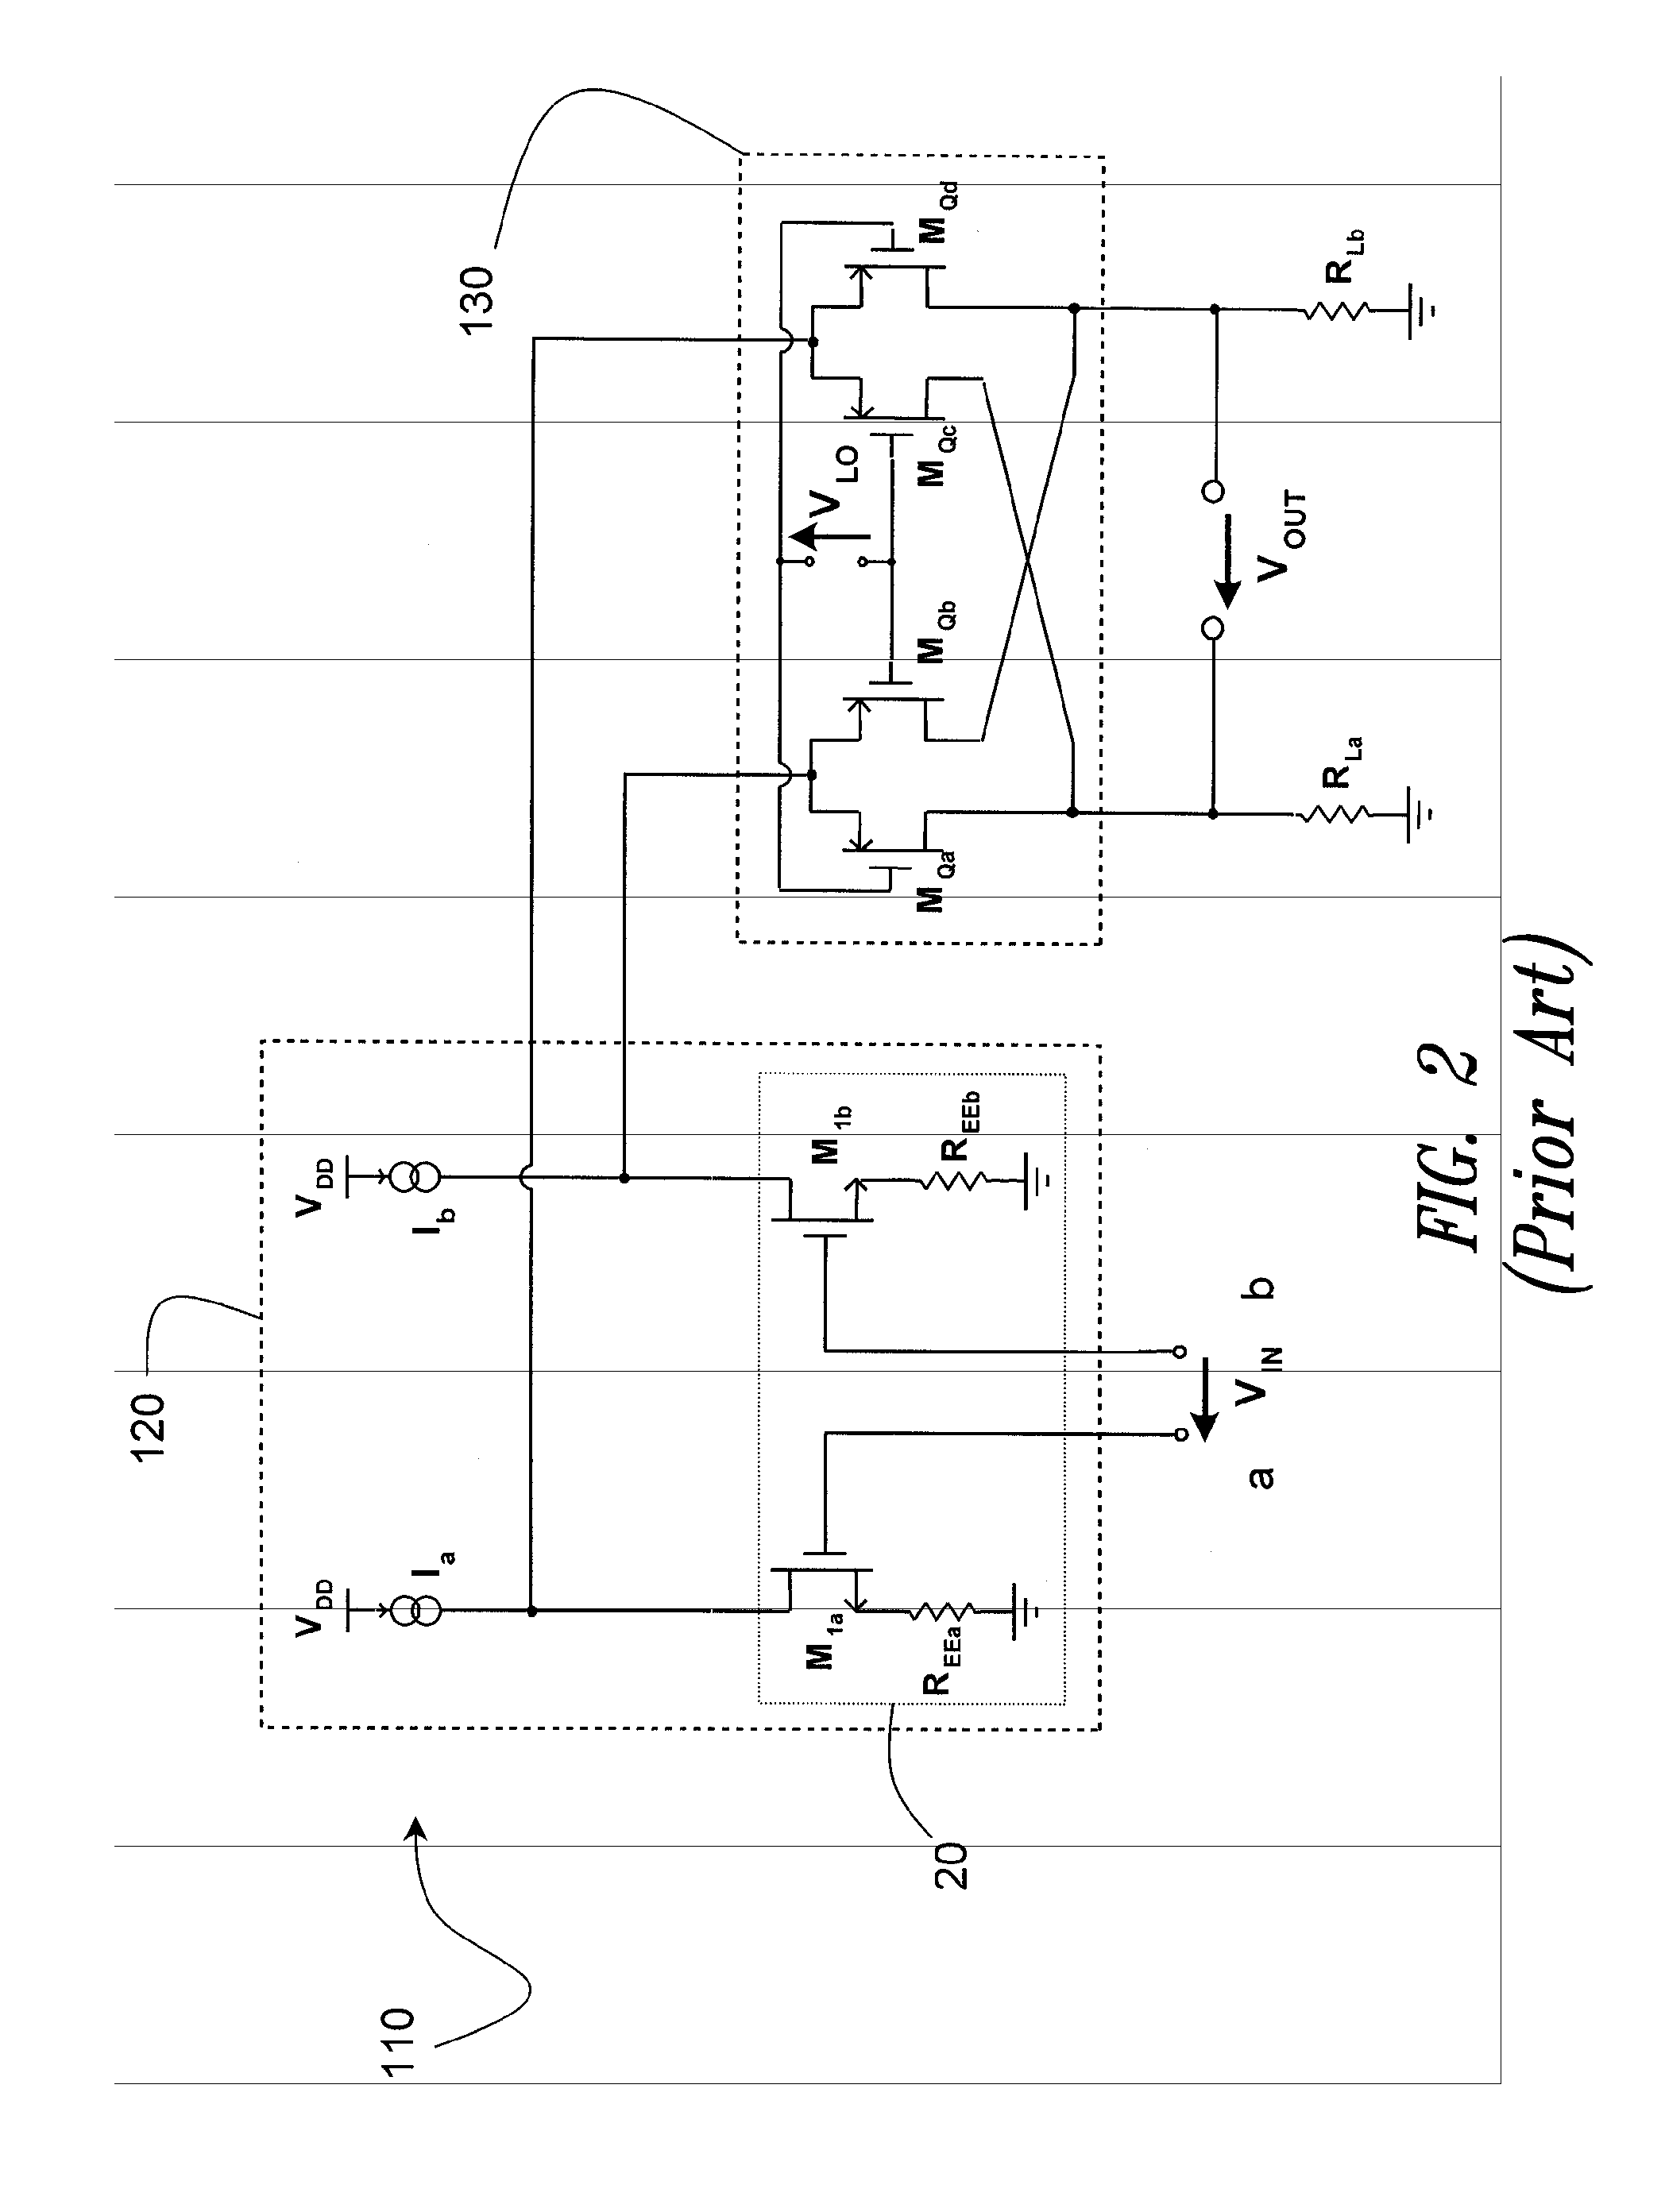 Modulator apparatus operating at low supply voltage, and corresponding method of modulation